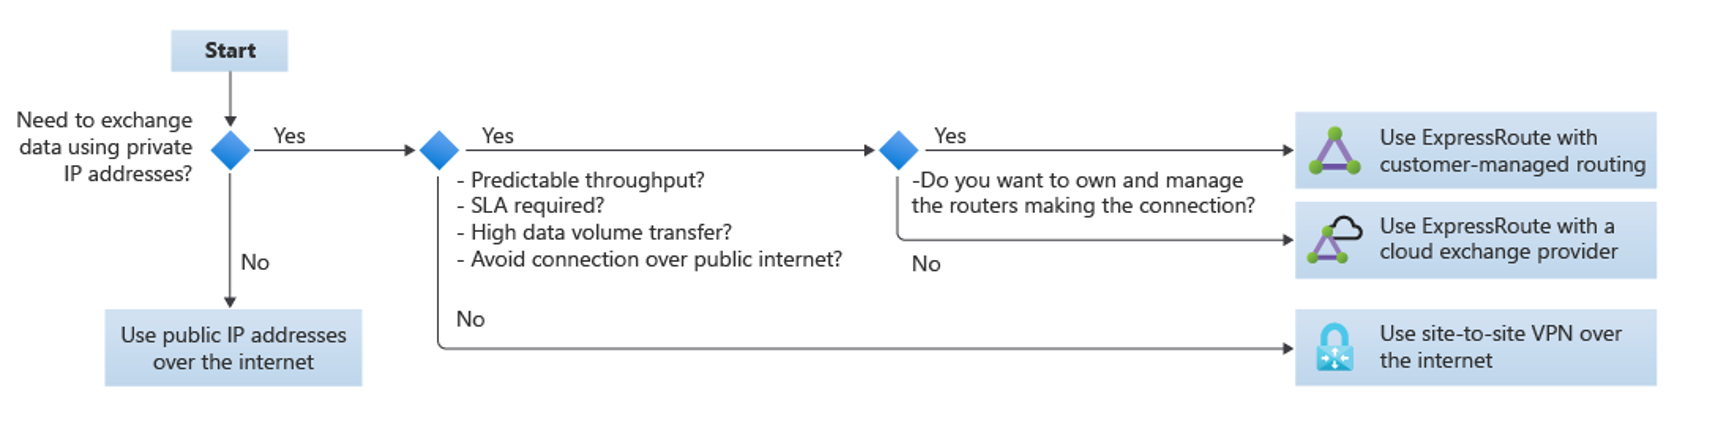 Flow chart to determine which connectivity method to use.